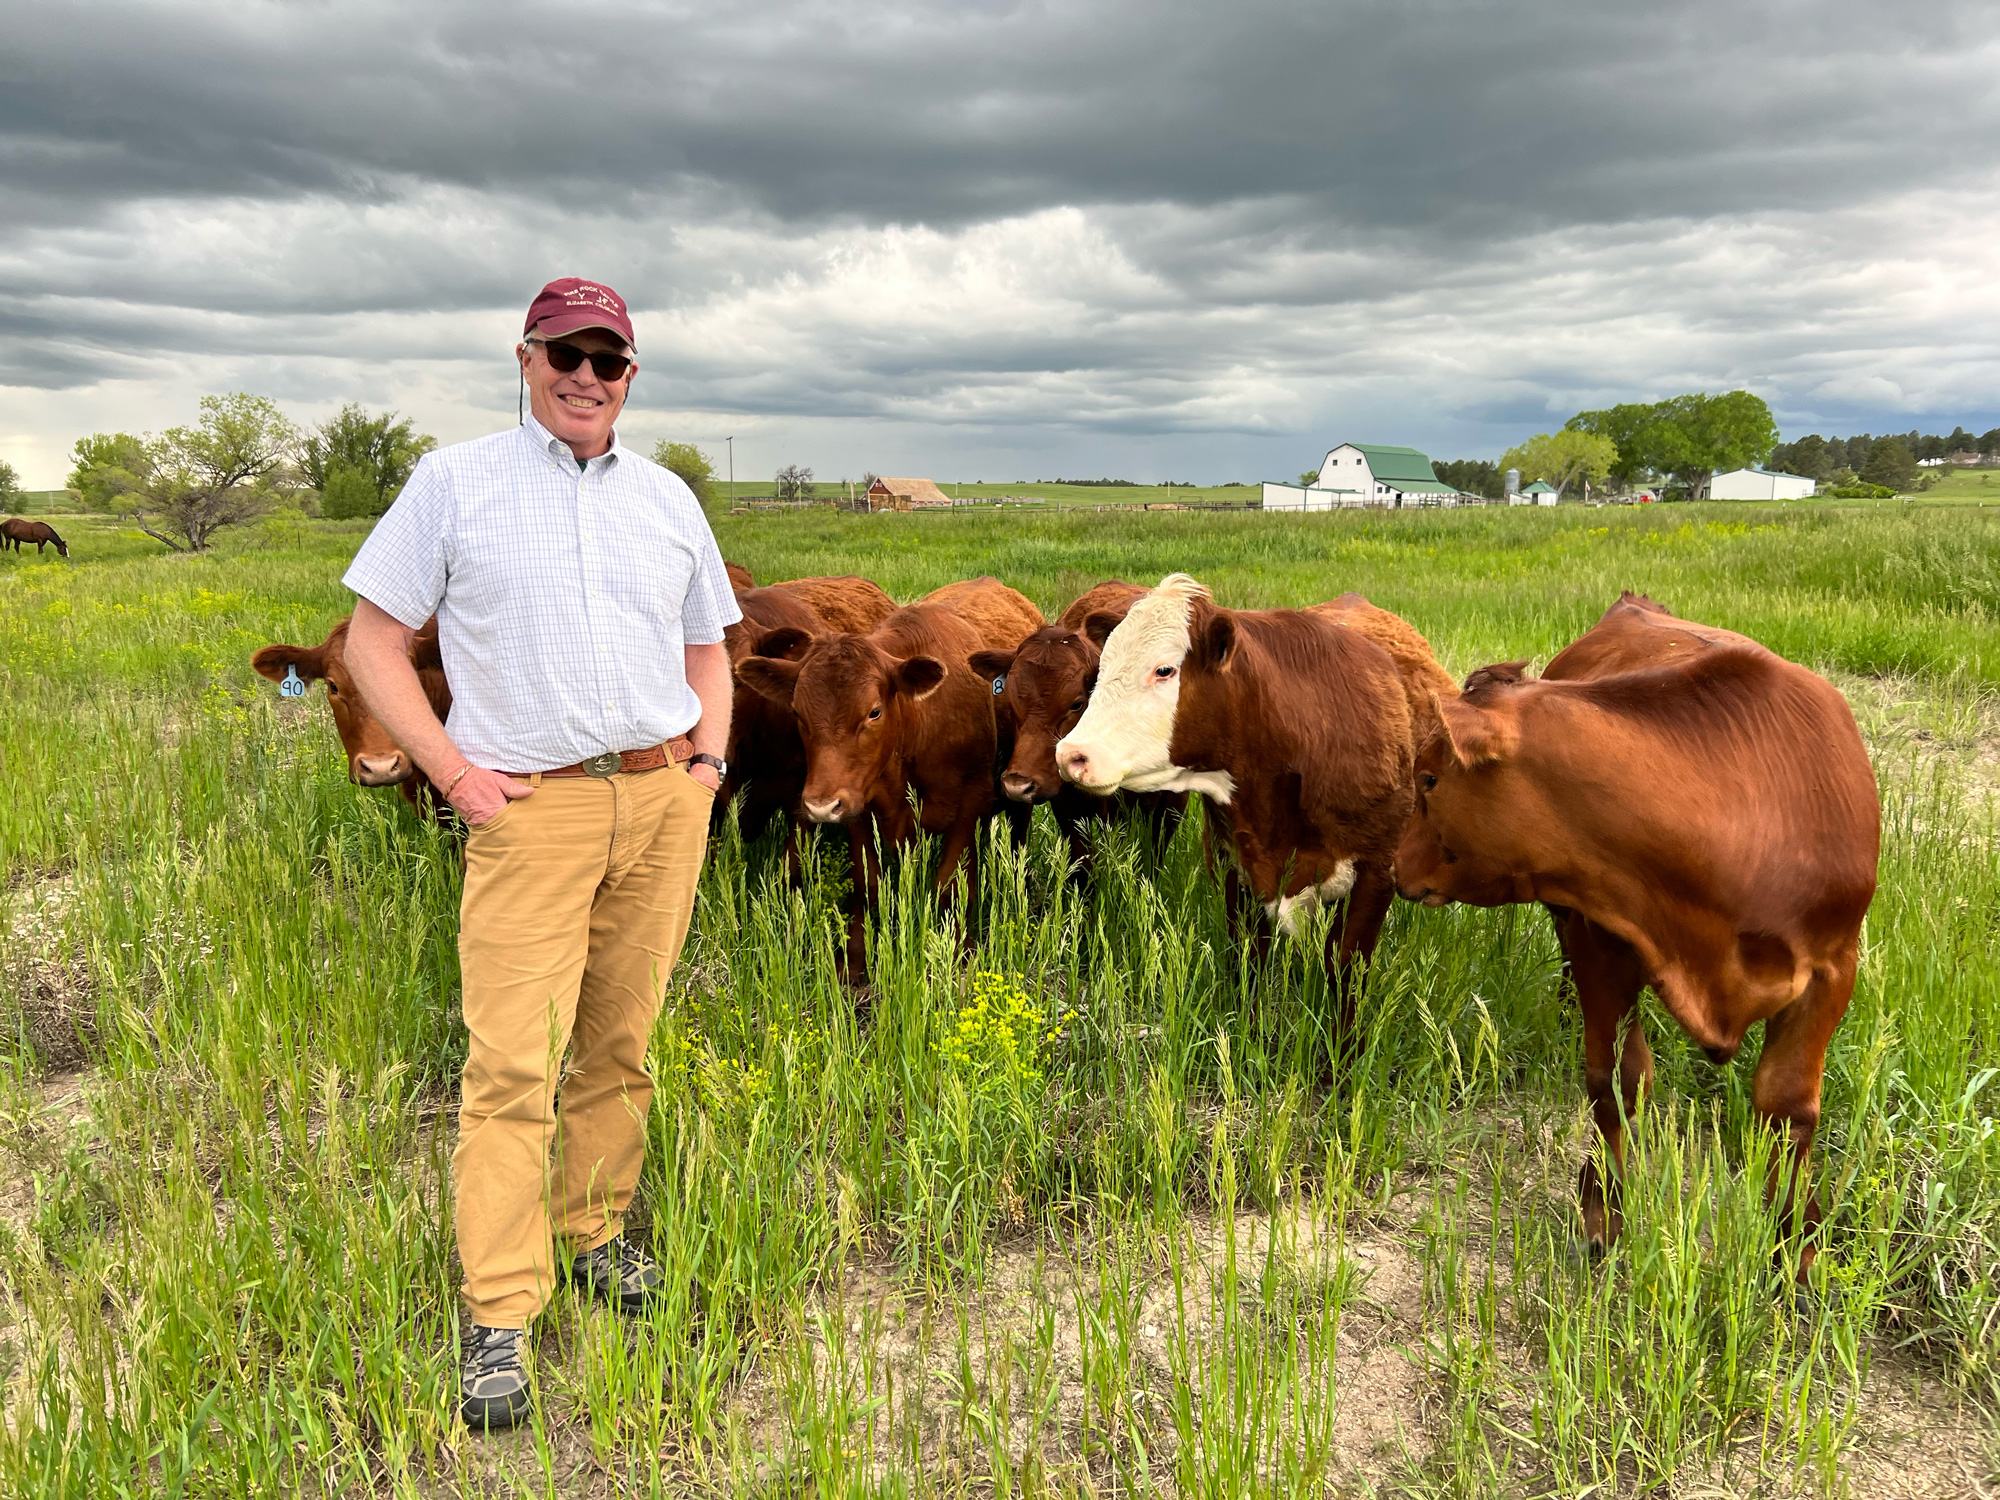 Ben Duke and red angus cows in a field